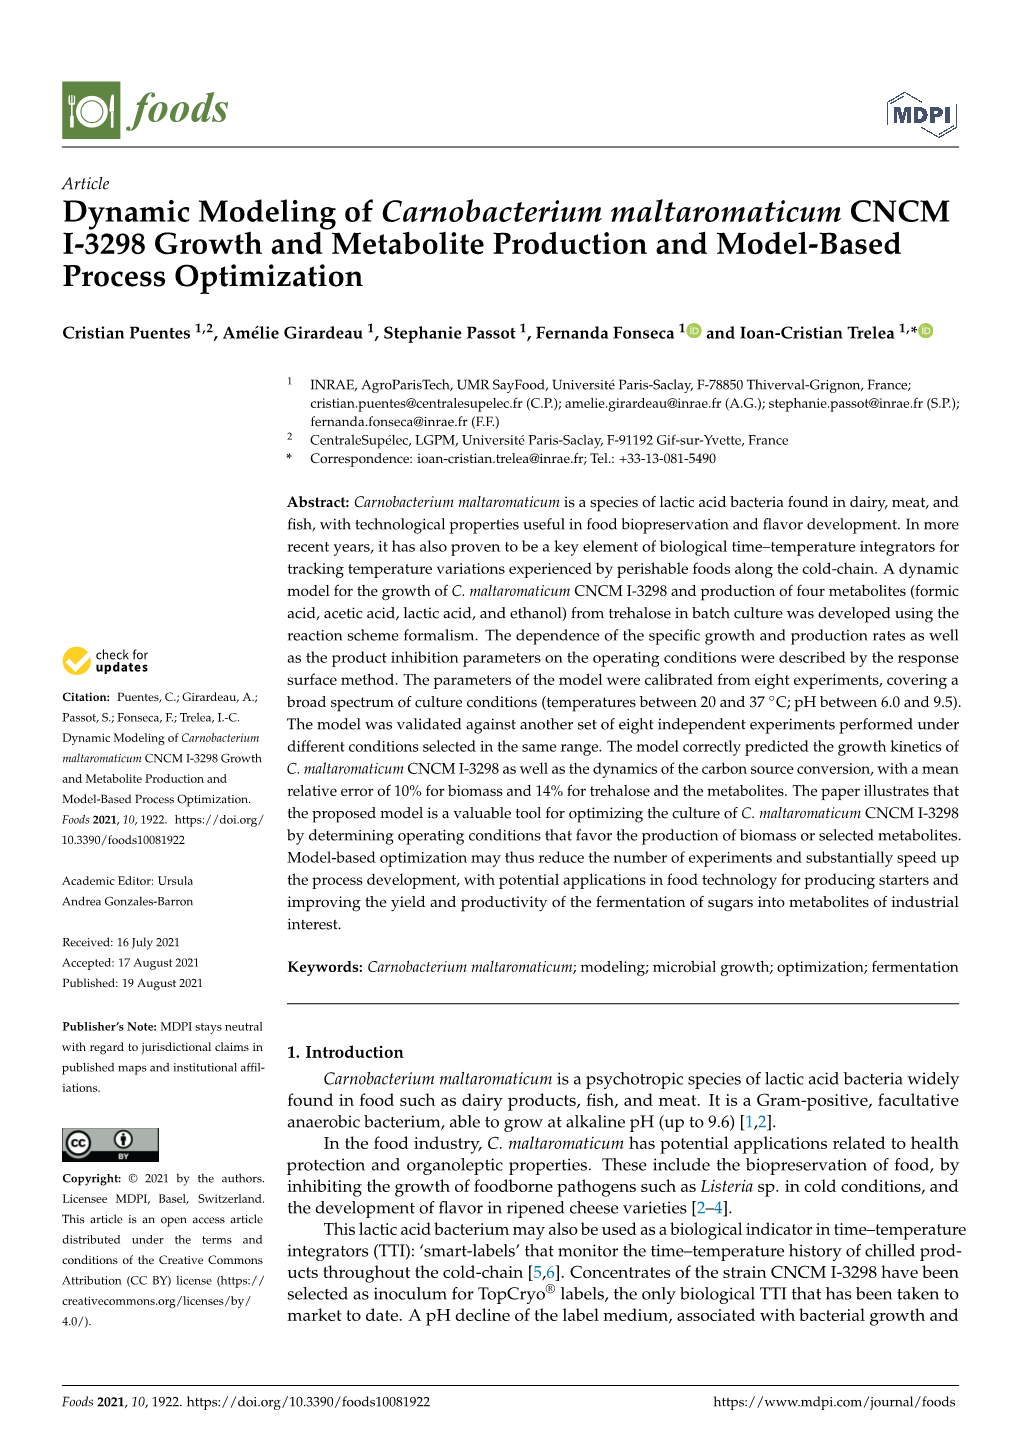 Dynamic Modeling of Carnobacterium Maltaromaticum CNCM I-3298 Growth and Metabolite Production and Model-Based Process Optimization